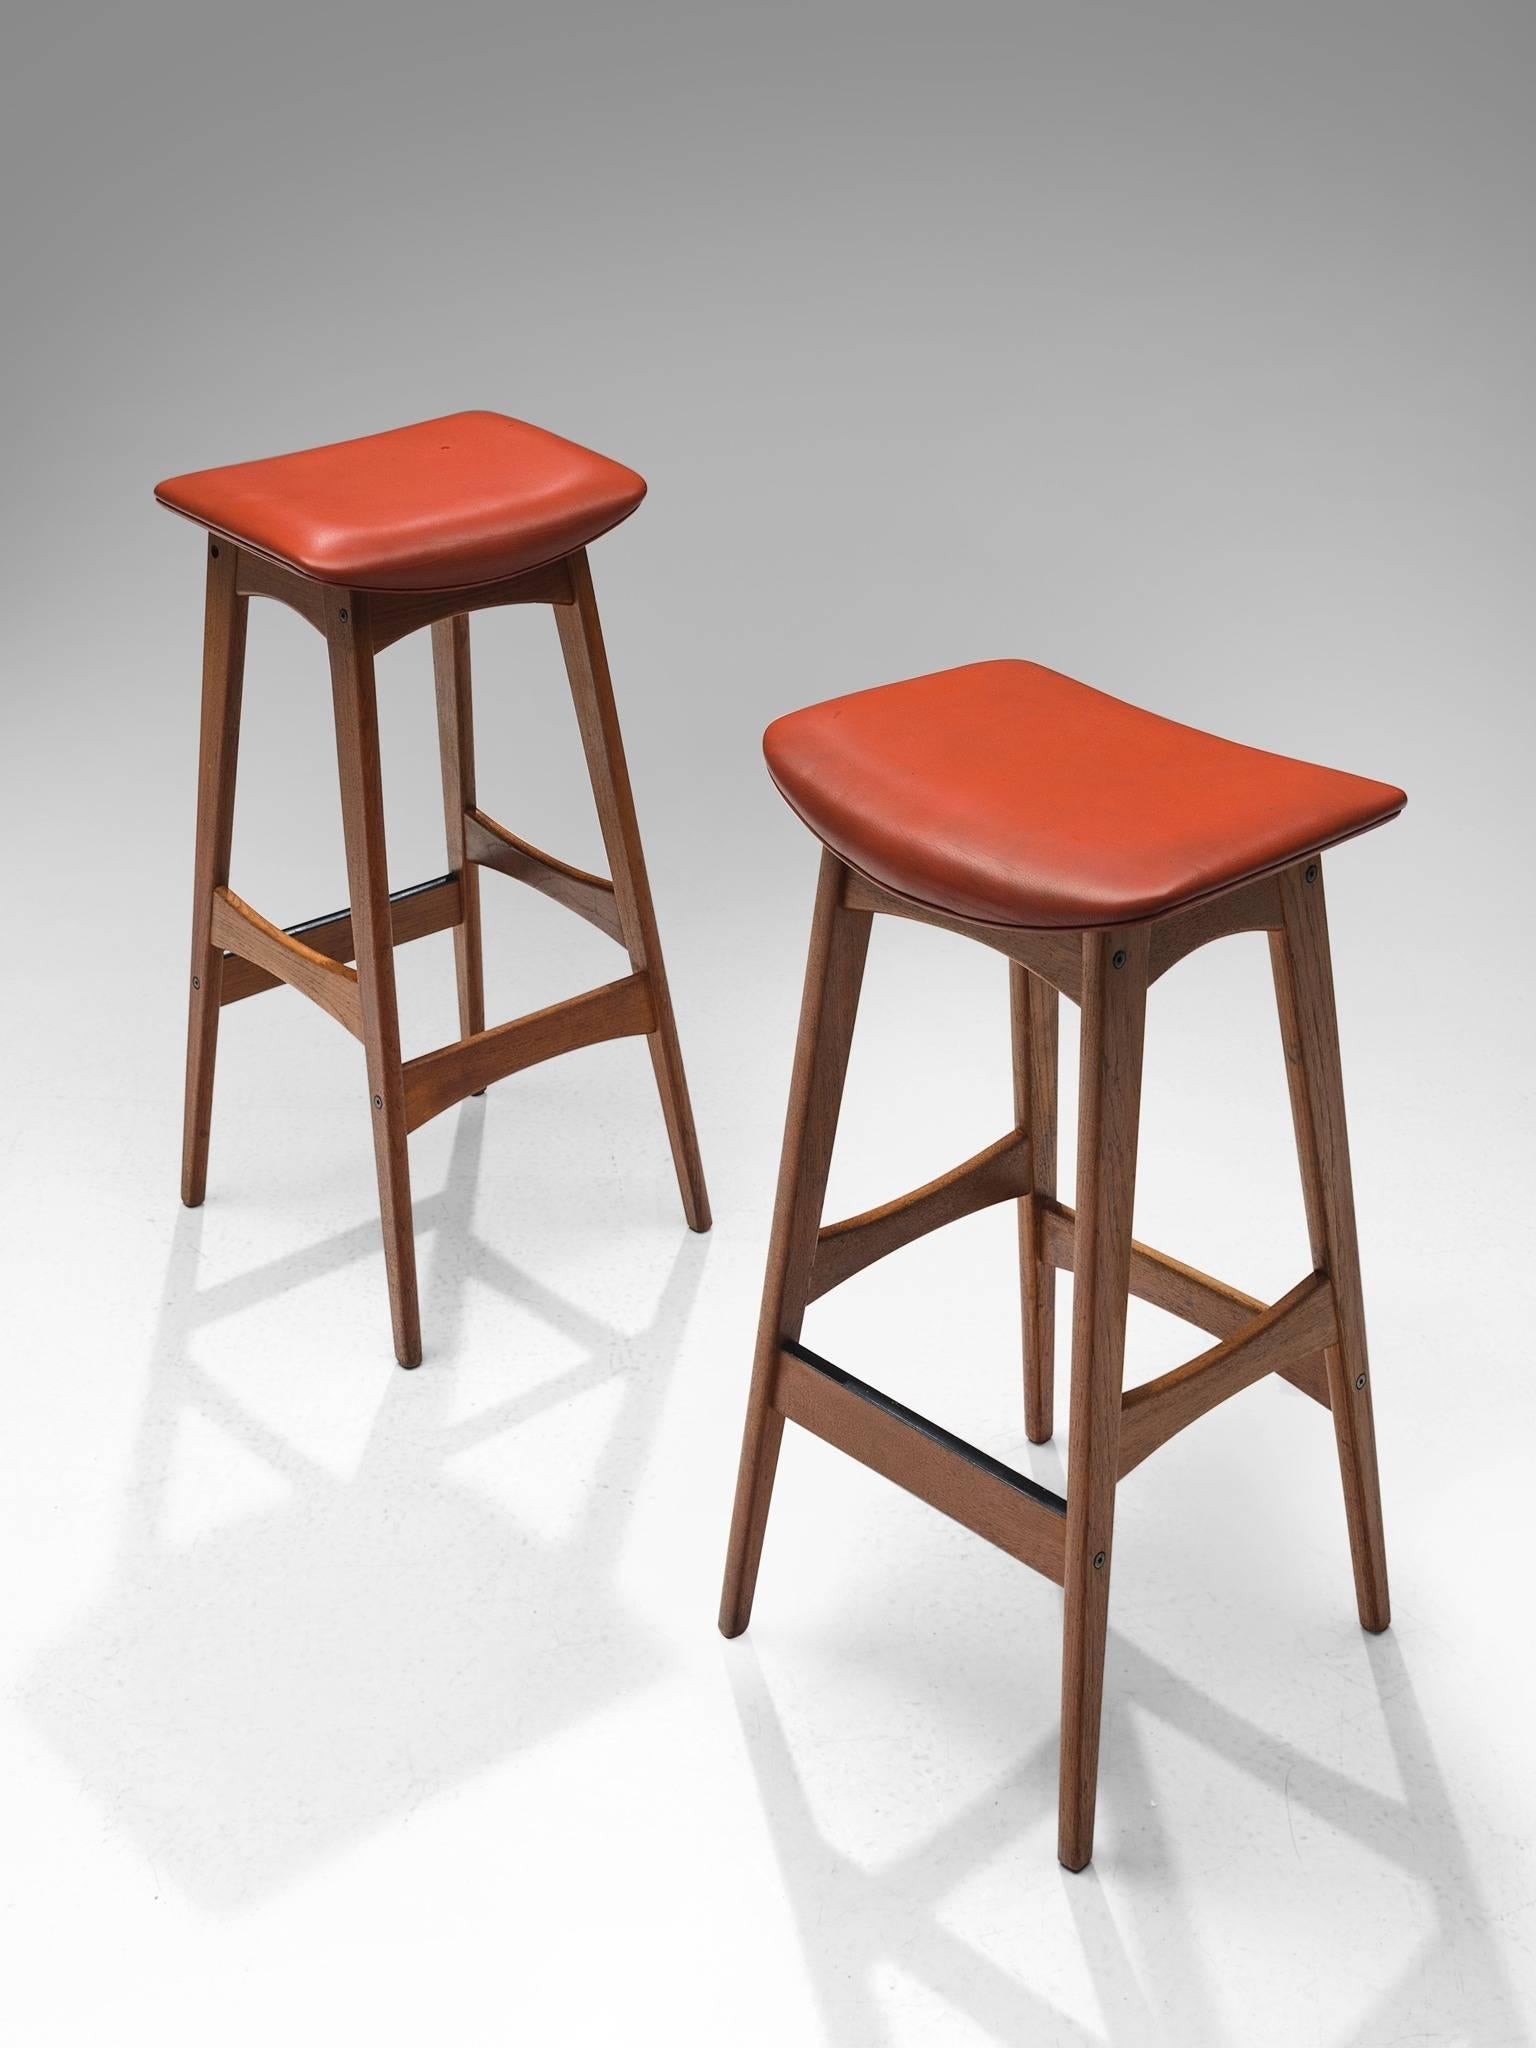 Johannes Andersen for Andersens Møbelfabrik, pair of two bar stools, with red brown faux leather seats and teak, Denmark, 1960s.

This is a set of two teak stools, with red brown faux leather on the seats. The stools are designed by Johannes